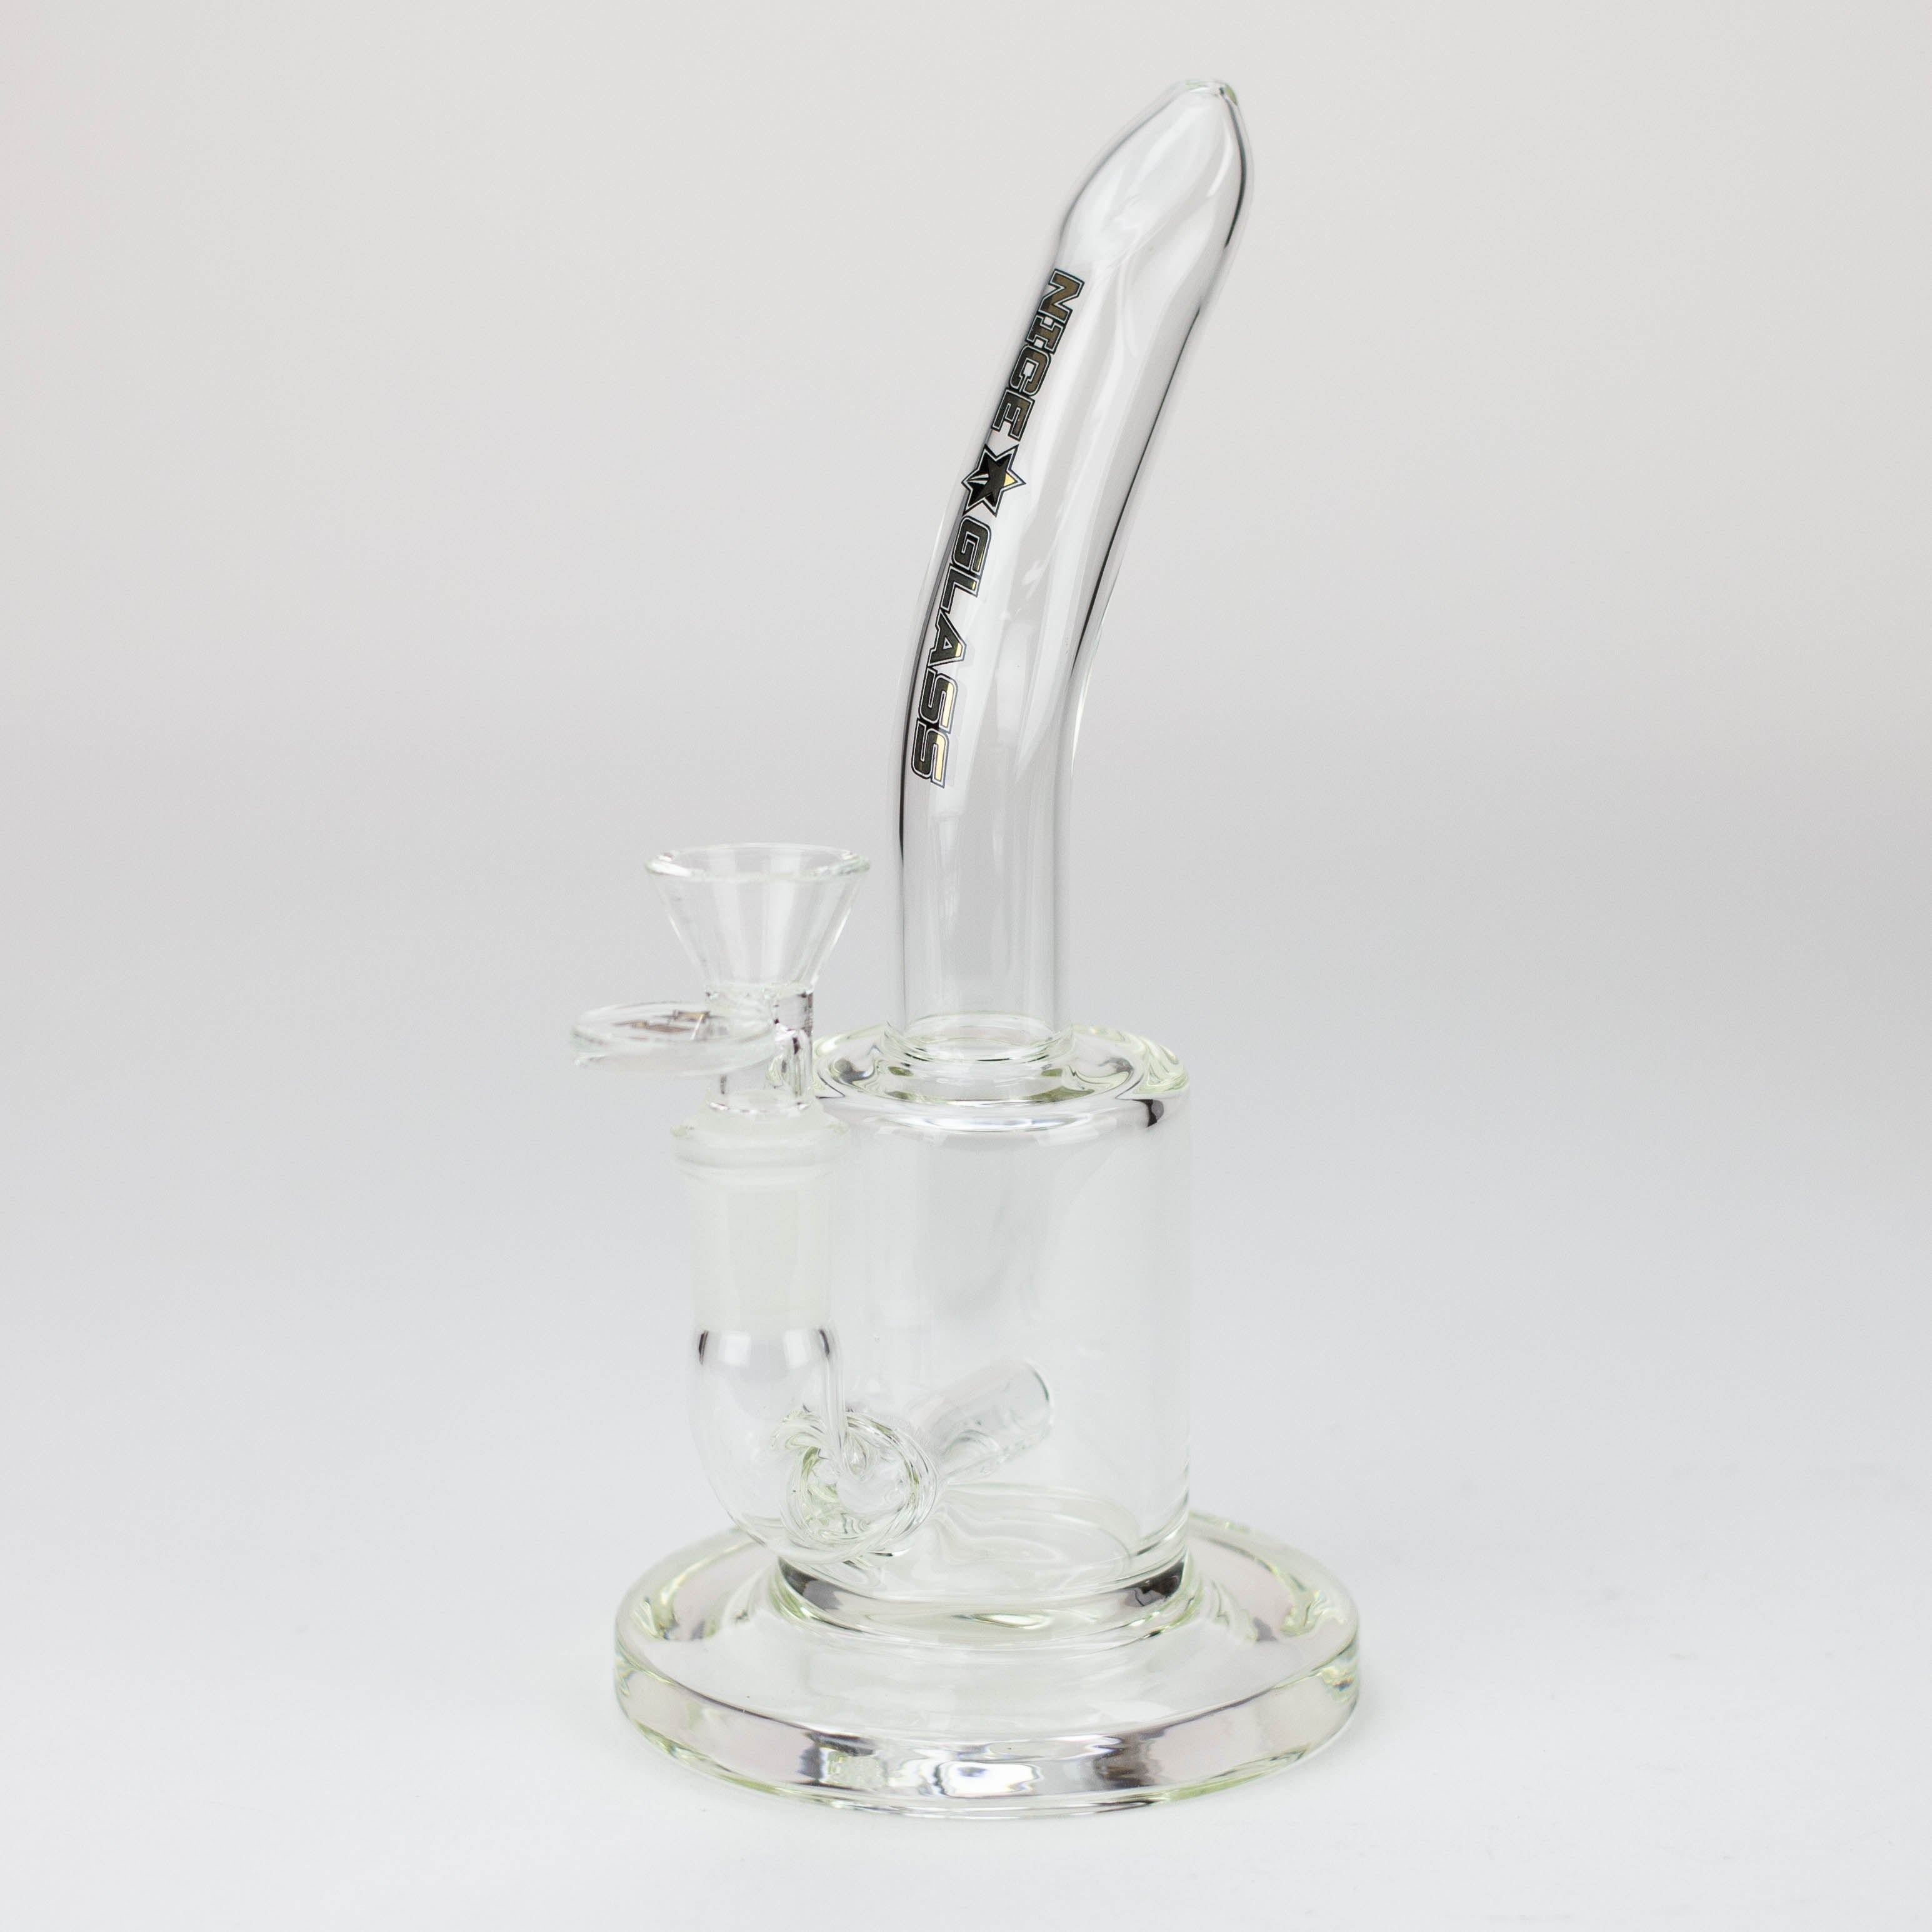 NG-8 inch Inline Bubbler_3